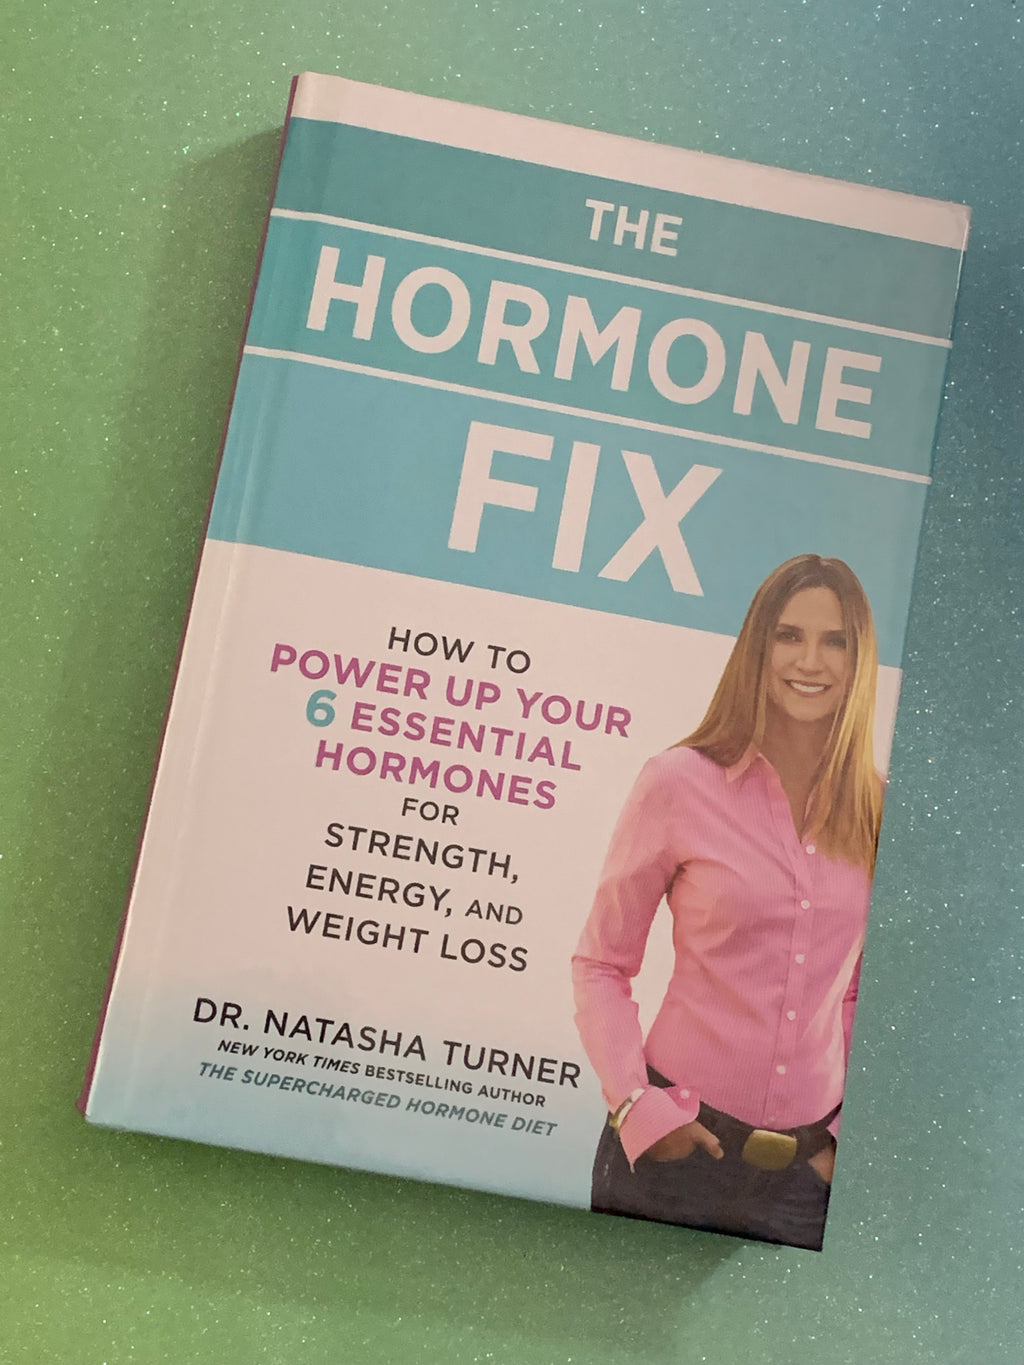 The Hormone Fix: How to Power Up your 6 Essential Hormones- By Dr. Natasha Turner